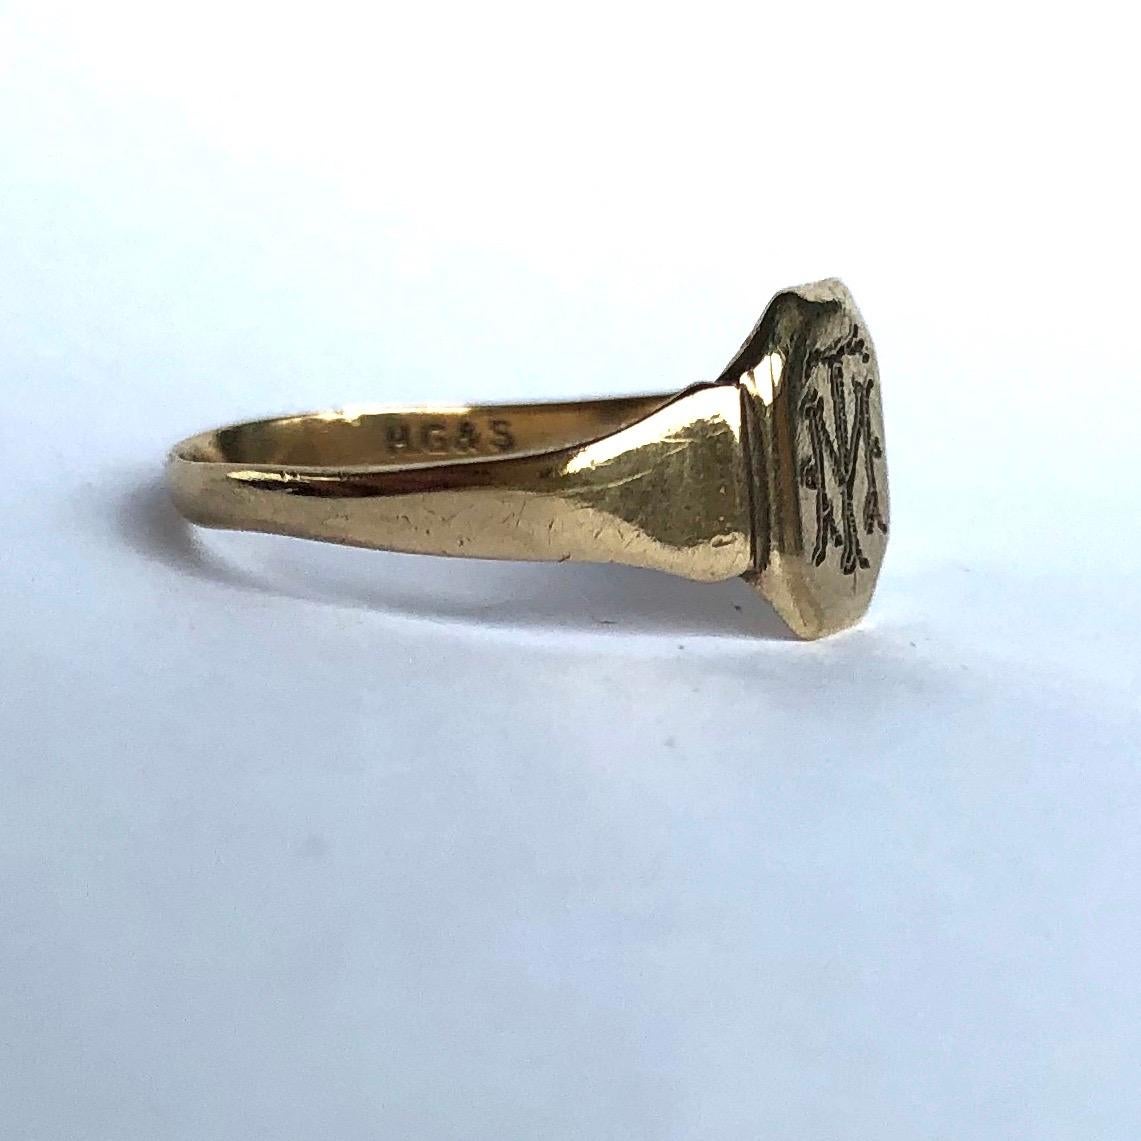 This signet ring is the classic soft octagon shape and is modelled in 9ct gold. The face has initials reading 'T.M' or 'M.T'. 

Size: L or 5 3/4 
Face Dimensions: 8x7mm 

Weight: 1g